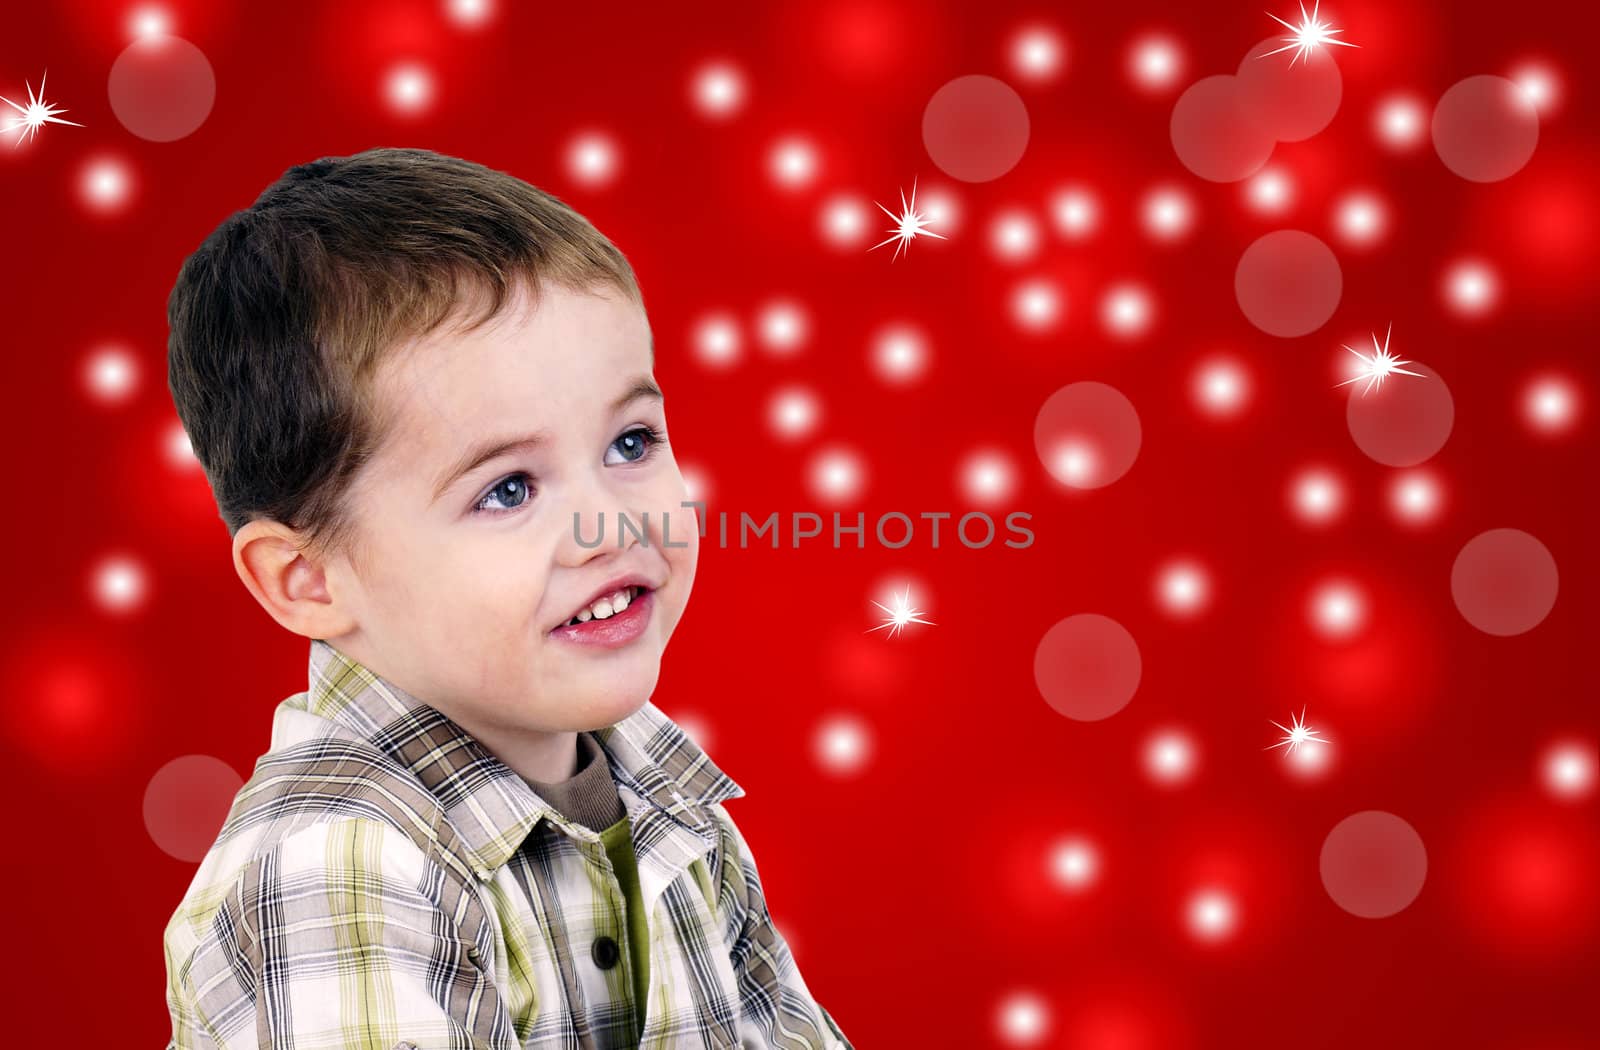 Studio shot of a very cute little boy toddler looking up over bright red Christmas background with bokeh and other light effects.